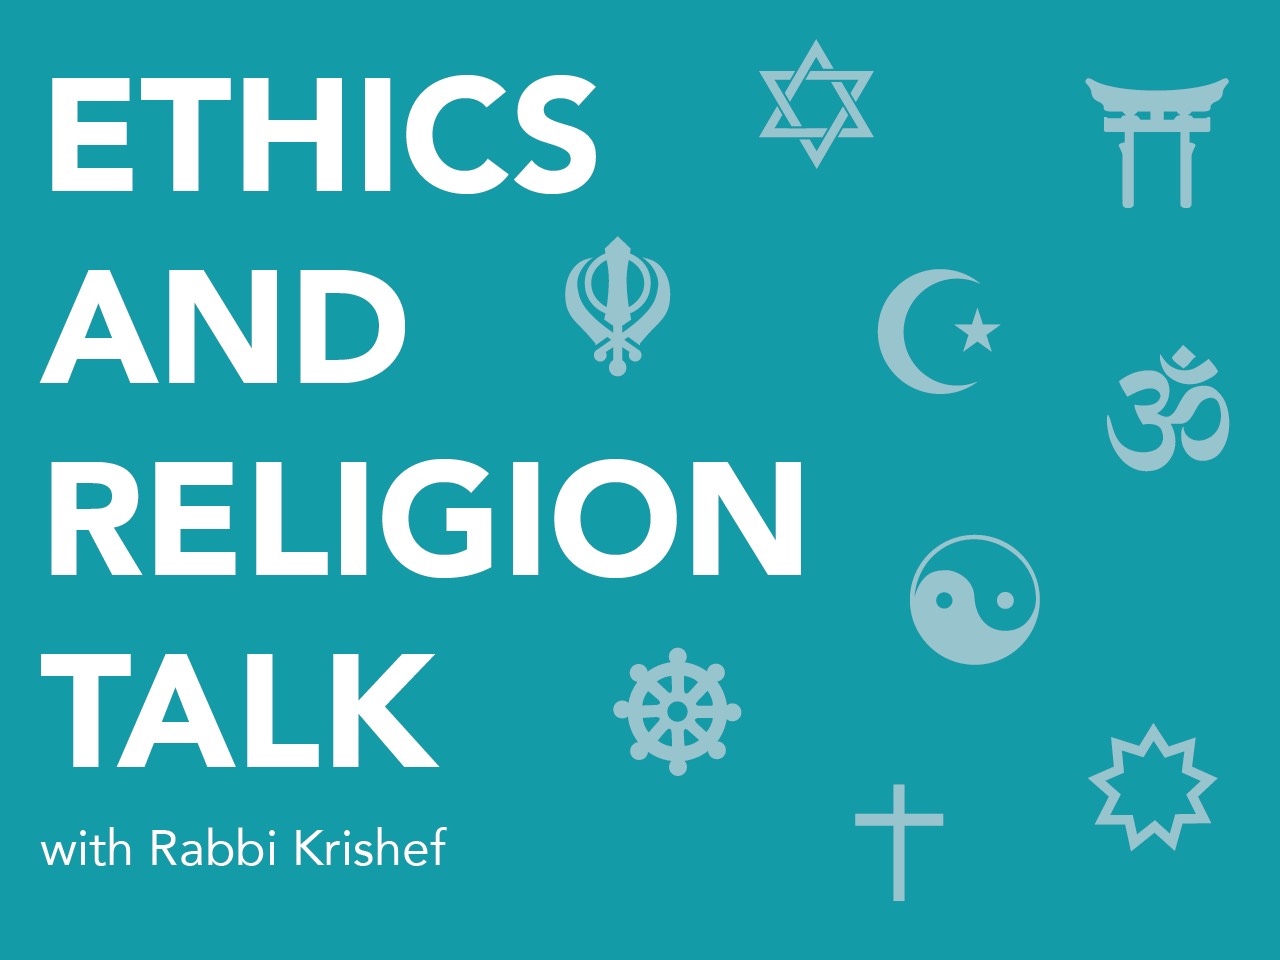 "Ethics and Religion Talk" Logo written in white on teal background with various religious symbols